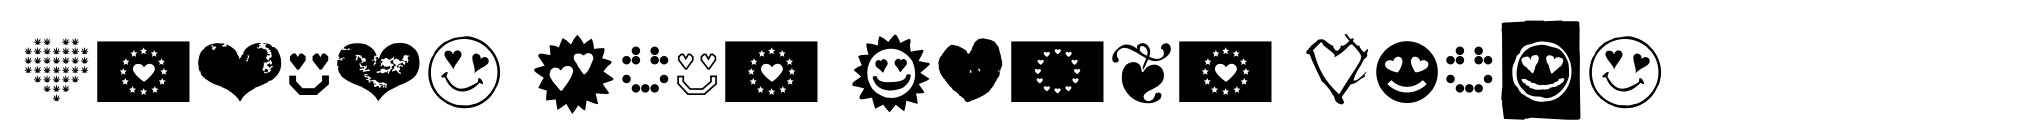 Hearts Love Smile Icons image